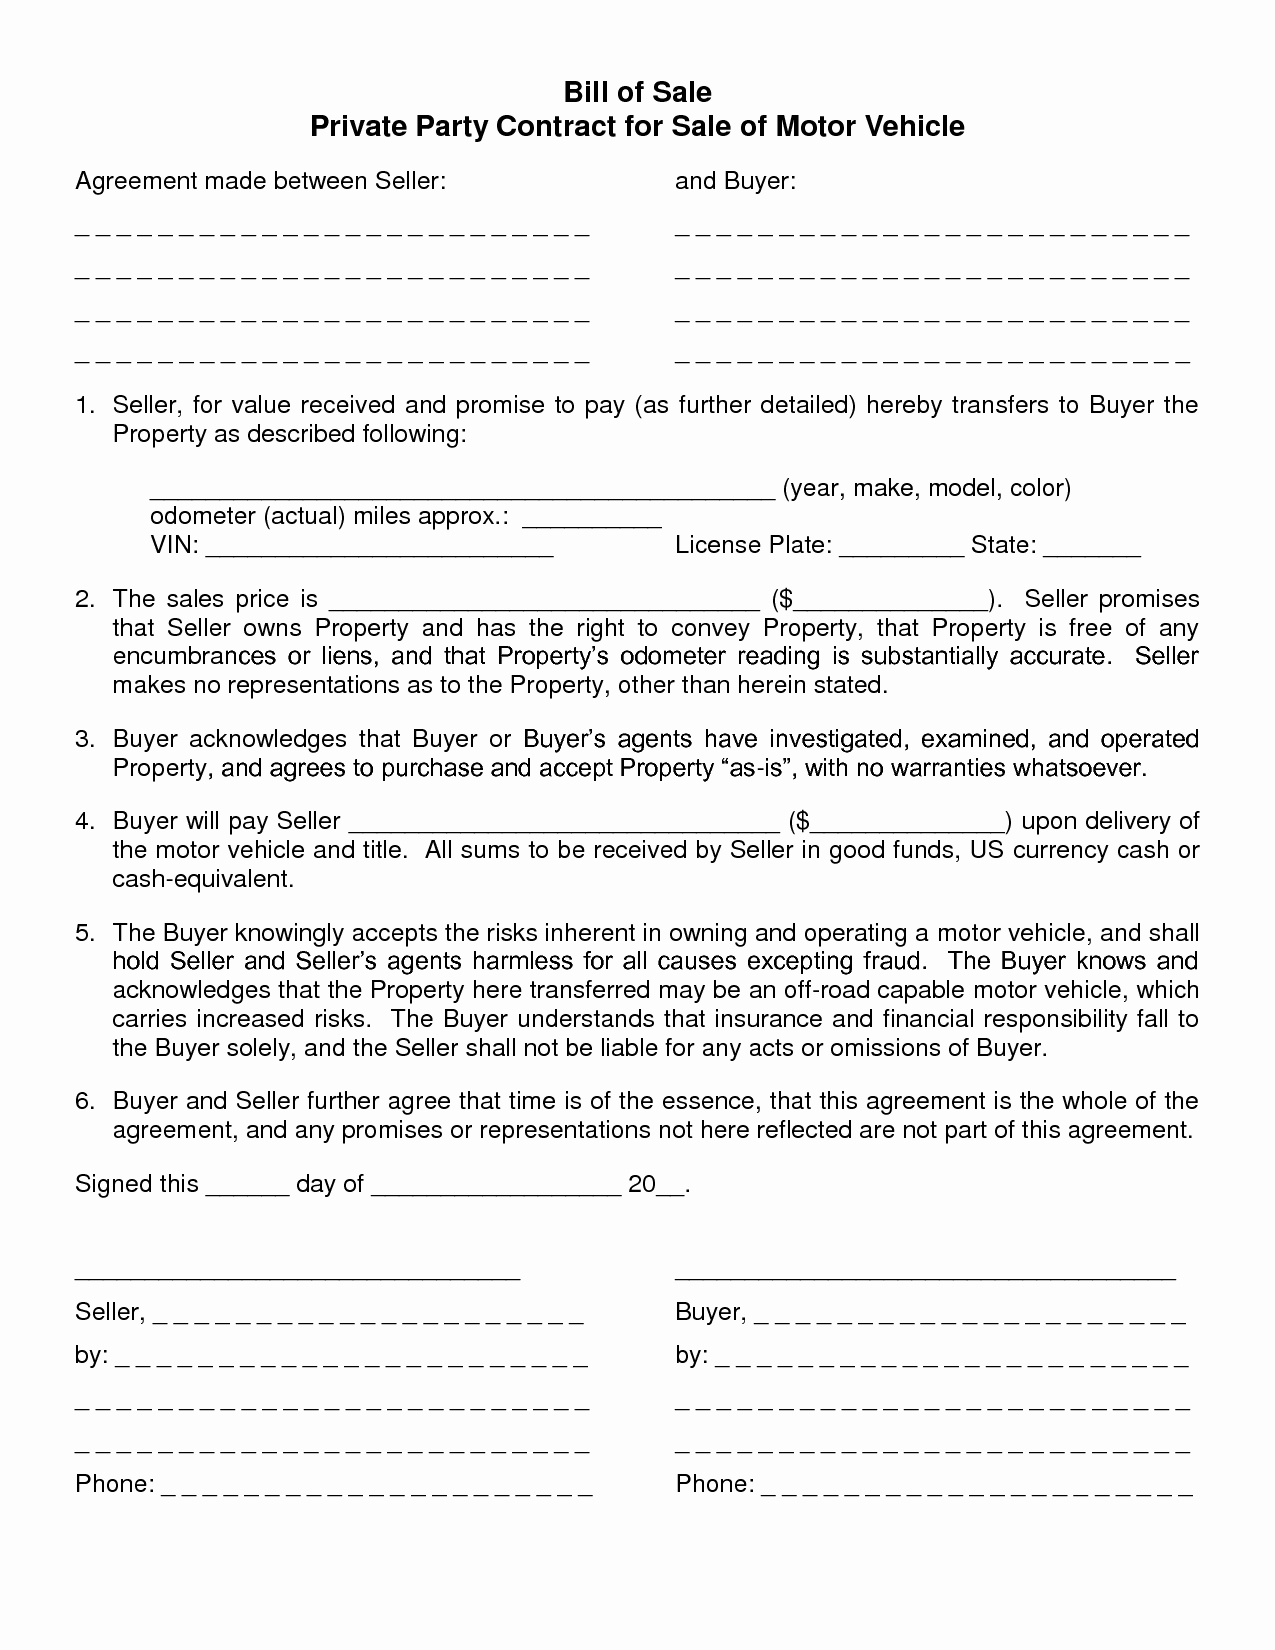 Private Car Sale Contract Payments New Agreement Template Category Page 13 Efoza